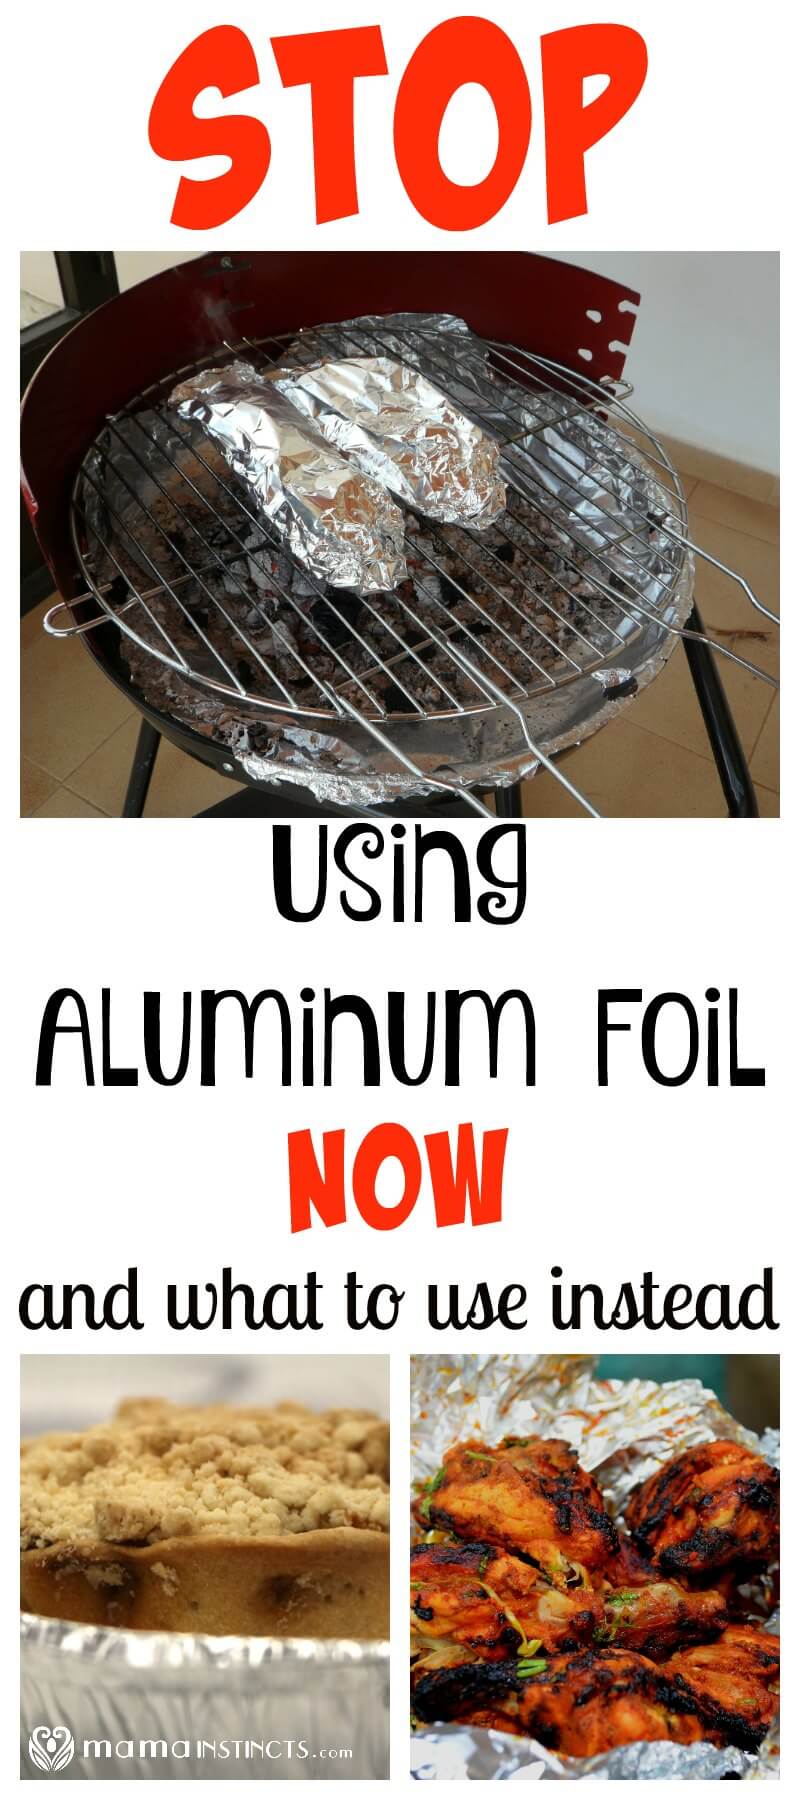 Are you using aluminum foil in your home? Stop everything you're doing and read this post. Find out why you should stop using aluminum foil immediately, and even more so, if you have small kids at home. Plus learn about alternatives you can use instead of aluminum foil.